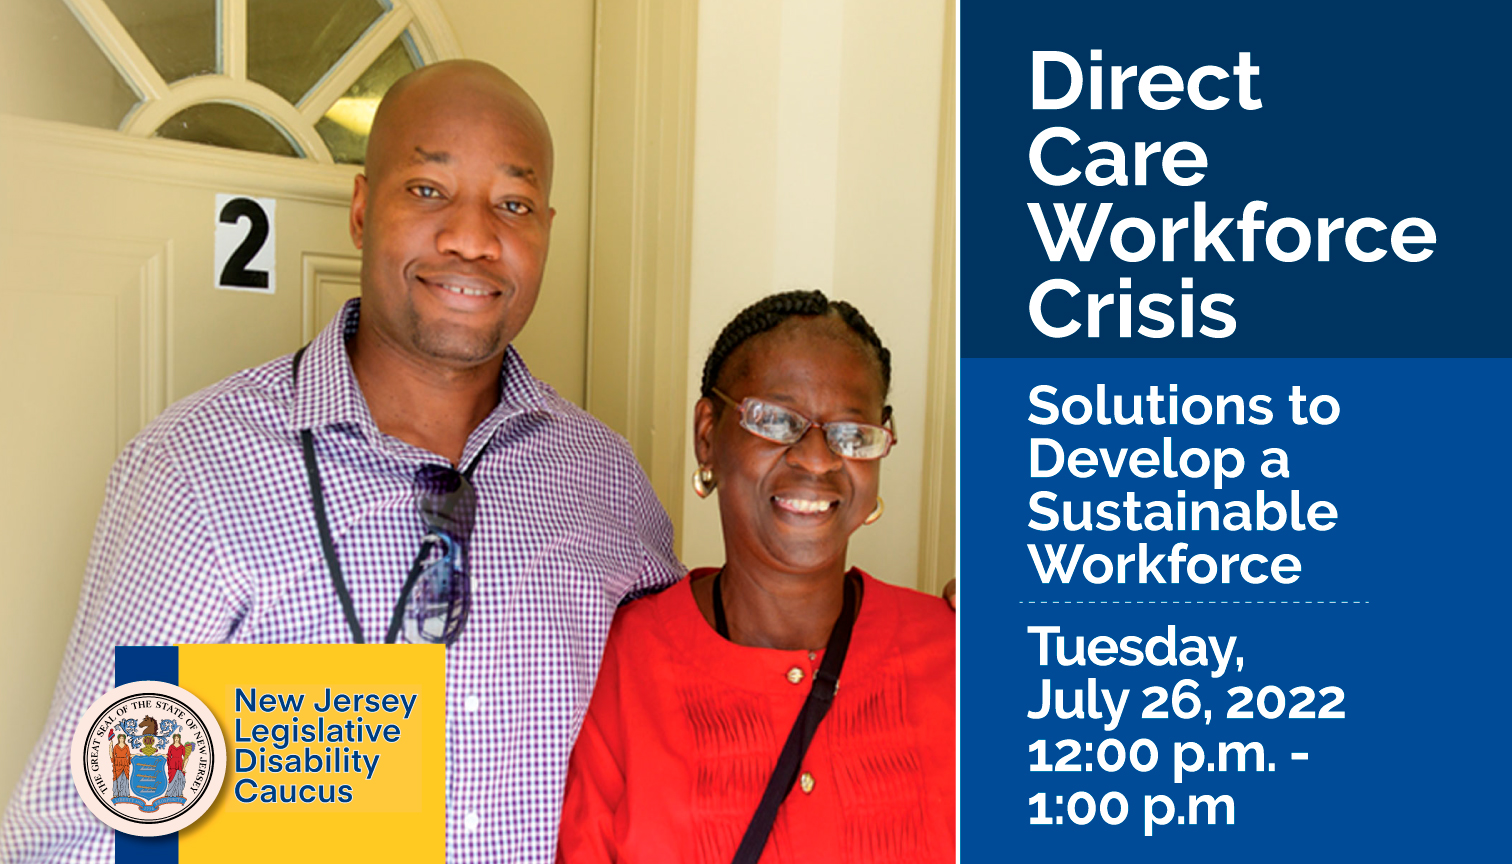 Direct Care Workforce Crisis – Solutions to Develop a Sustainable Workforce